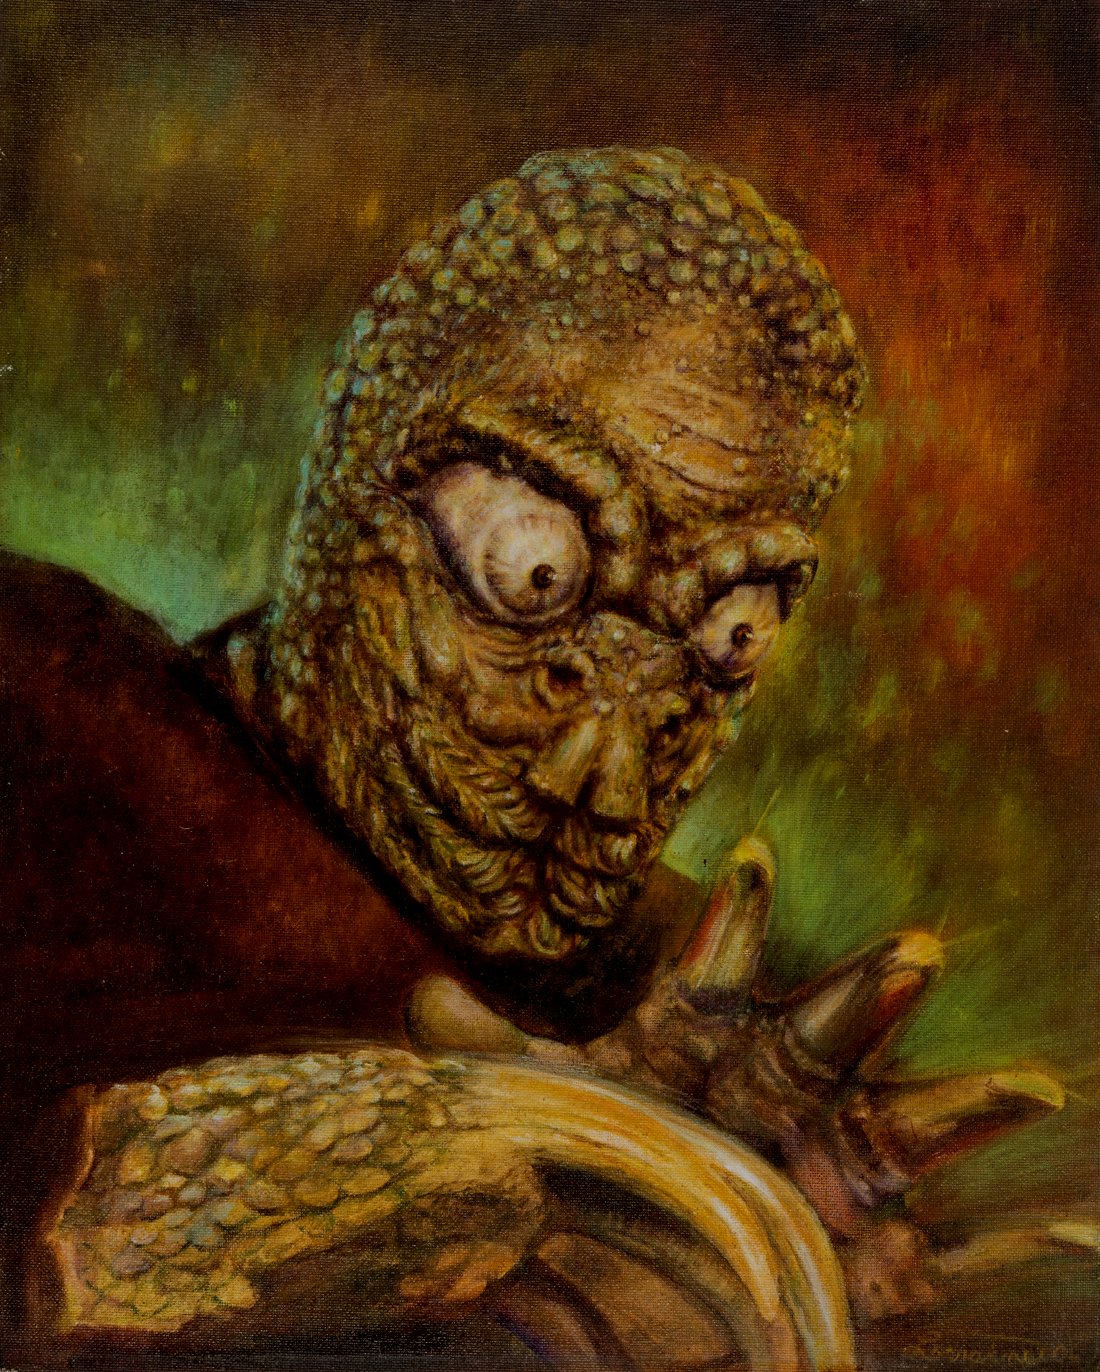 Image of Monster Bash Magazine #6 Cover Large PUBLISHED Painting (The Mole People!)